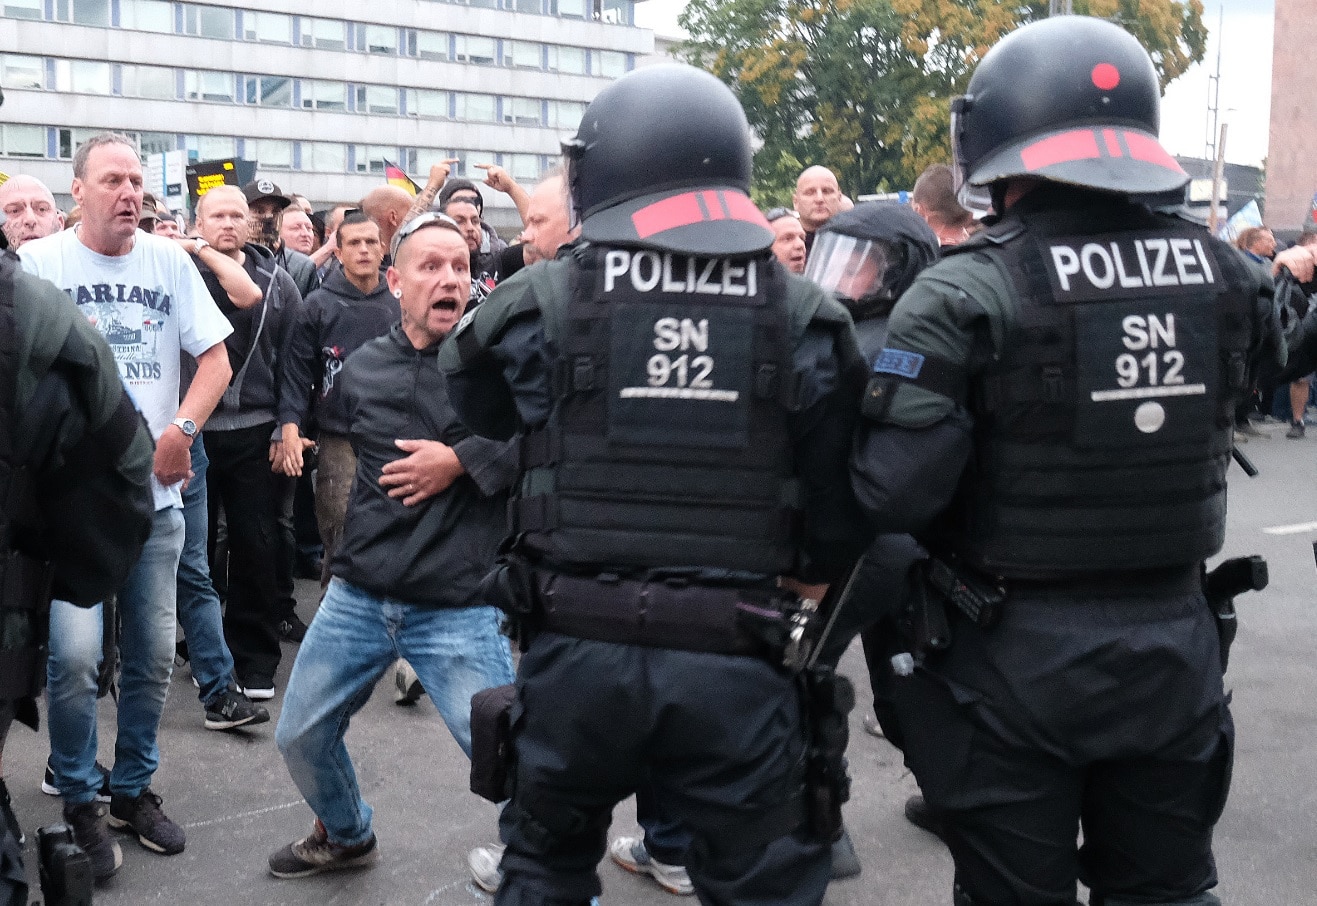 Police officers try to prevent a clash between right and left groups during a rally of the right-wing after the violent death of a 35-year-old man